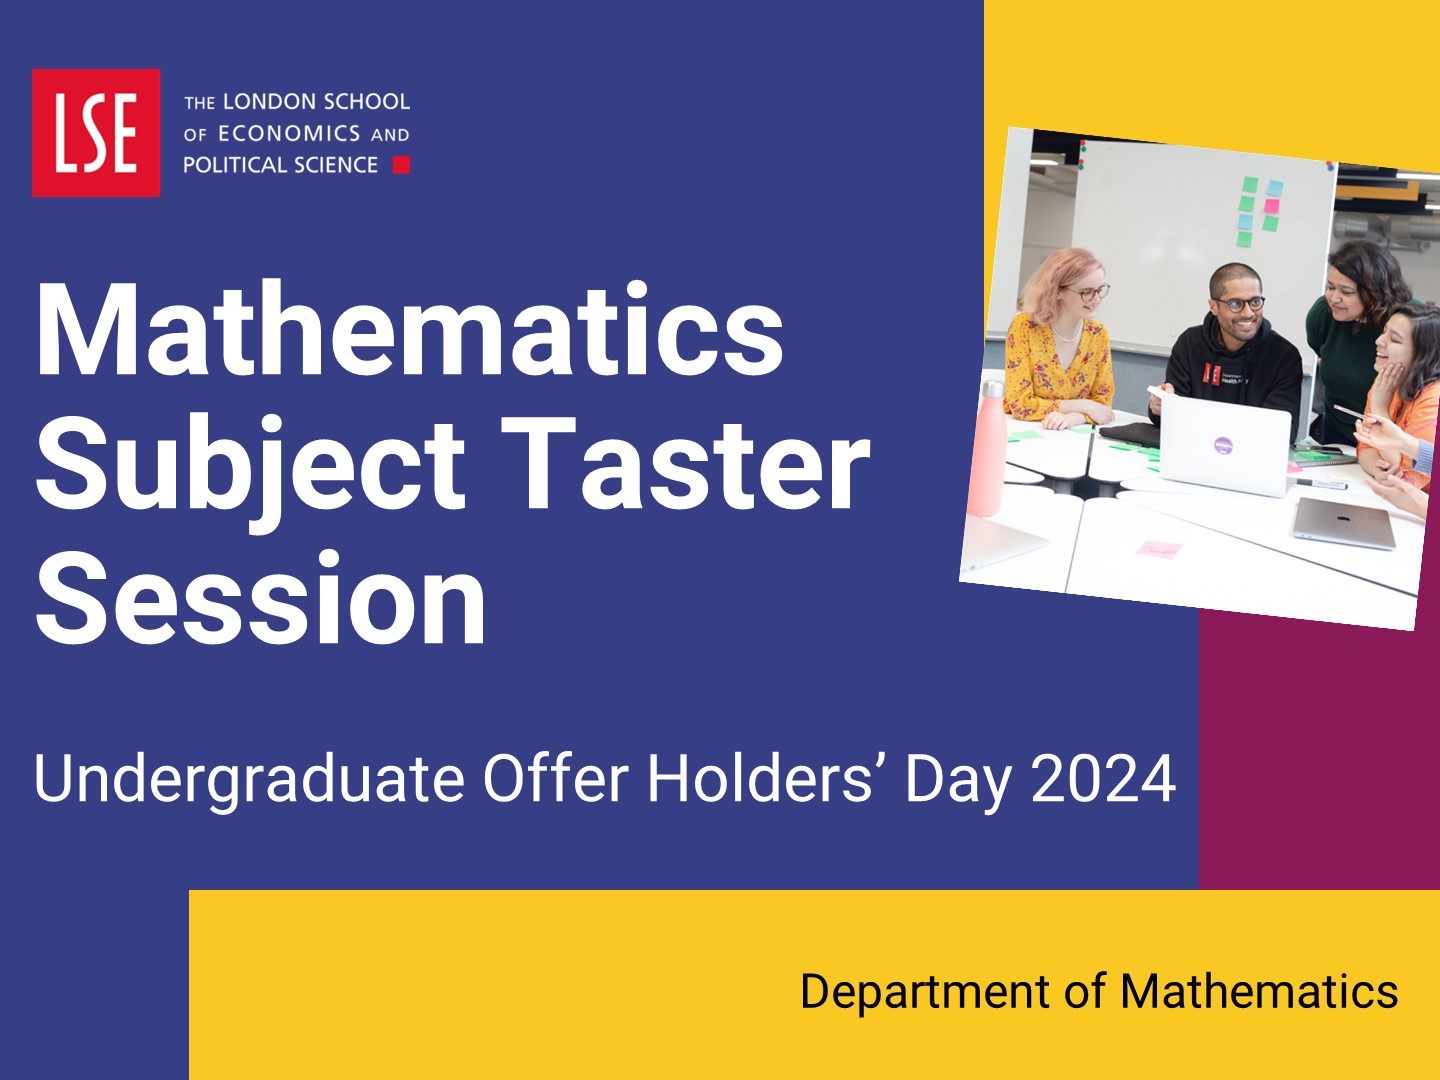 Watch the mathematics subject taster session